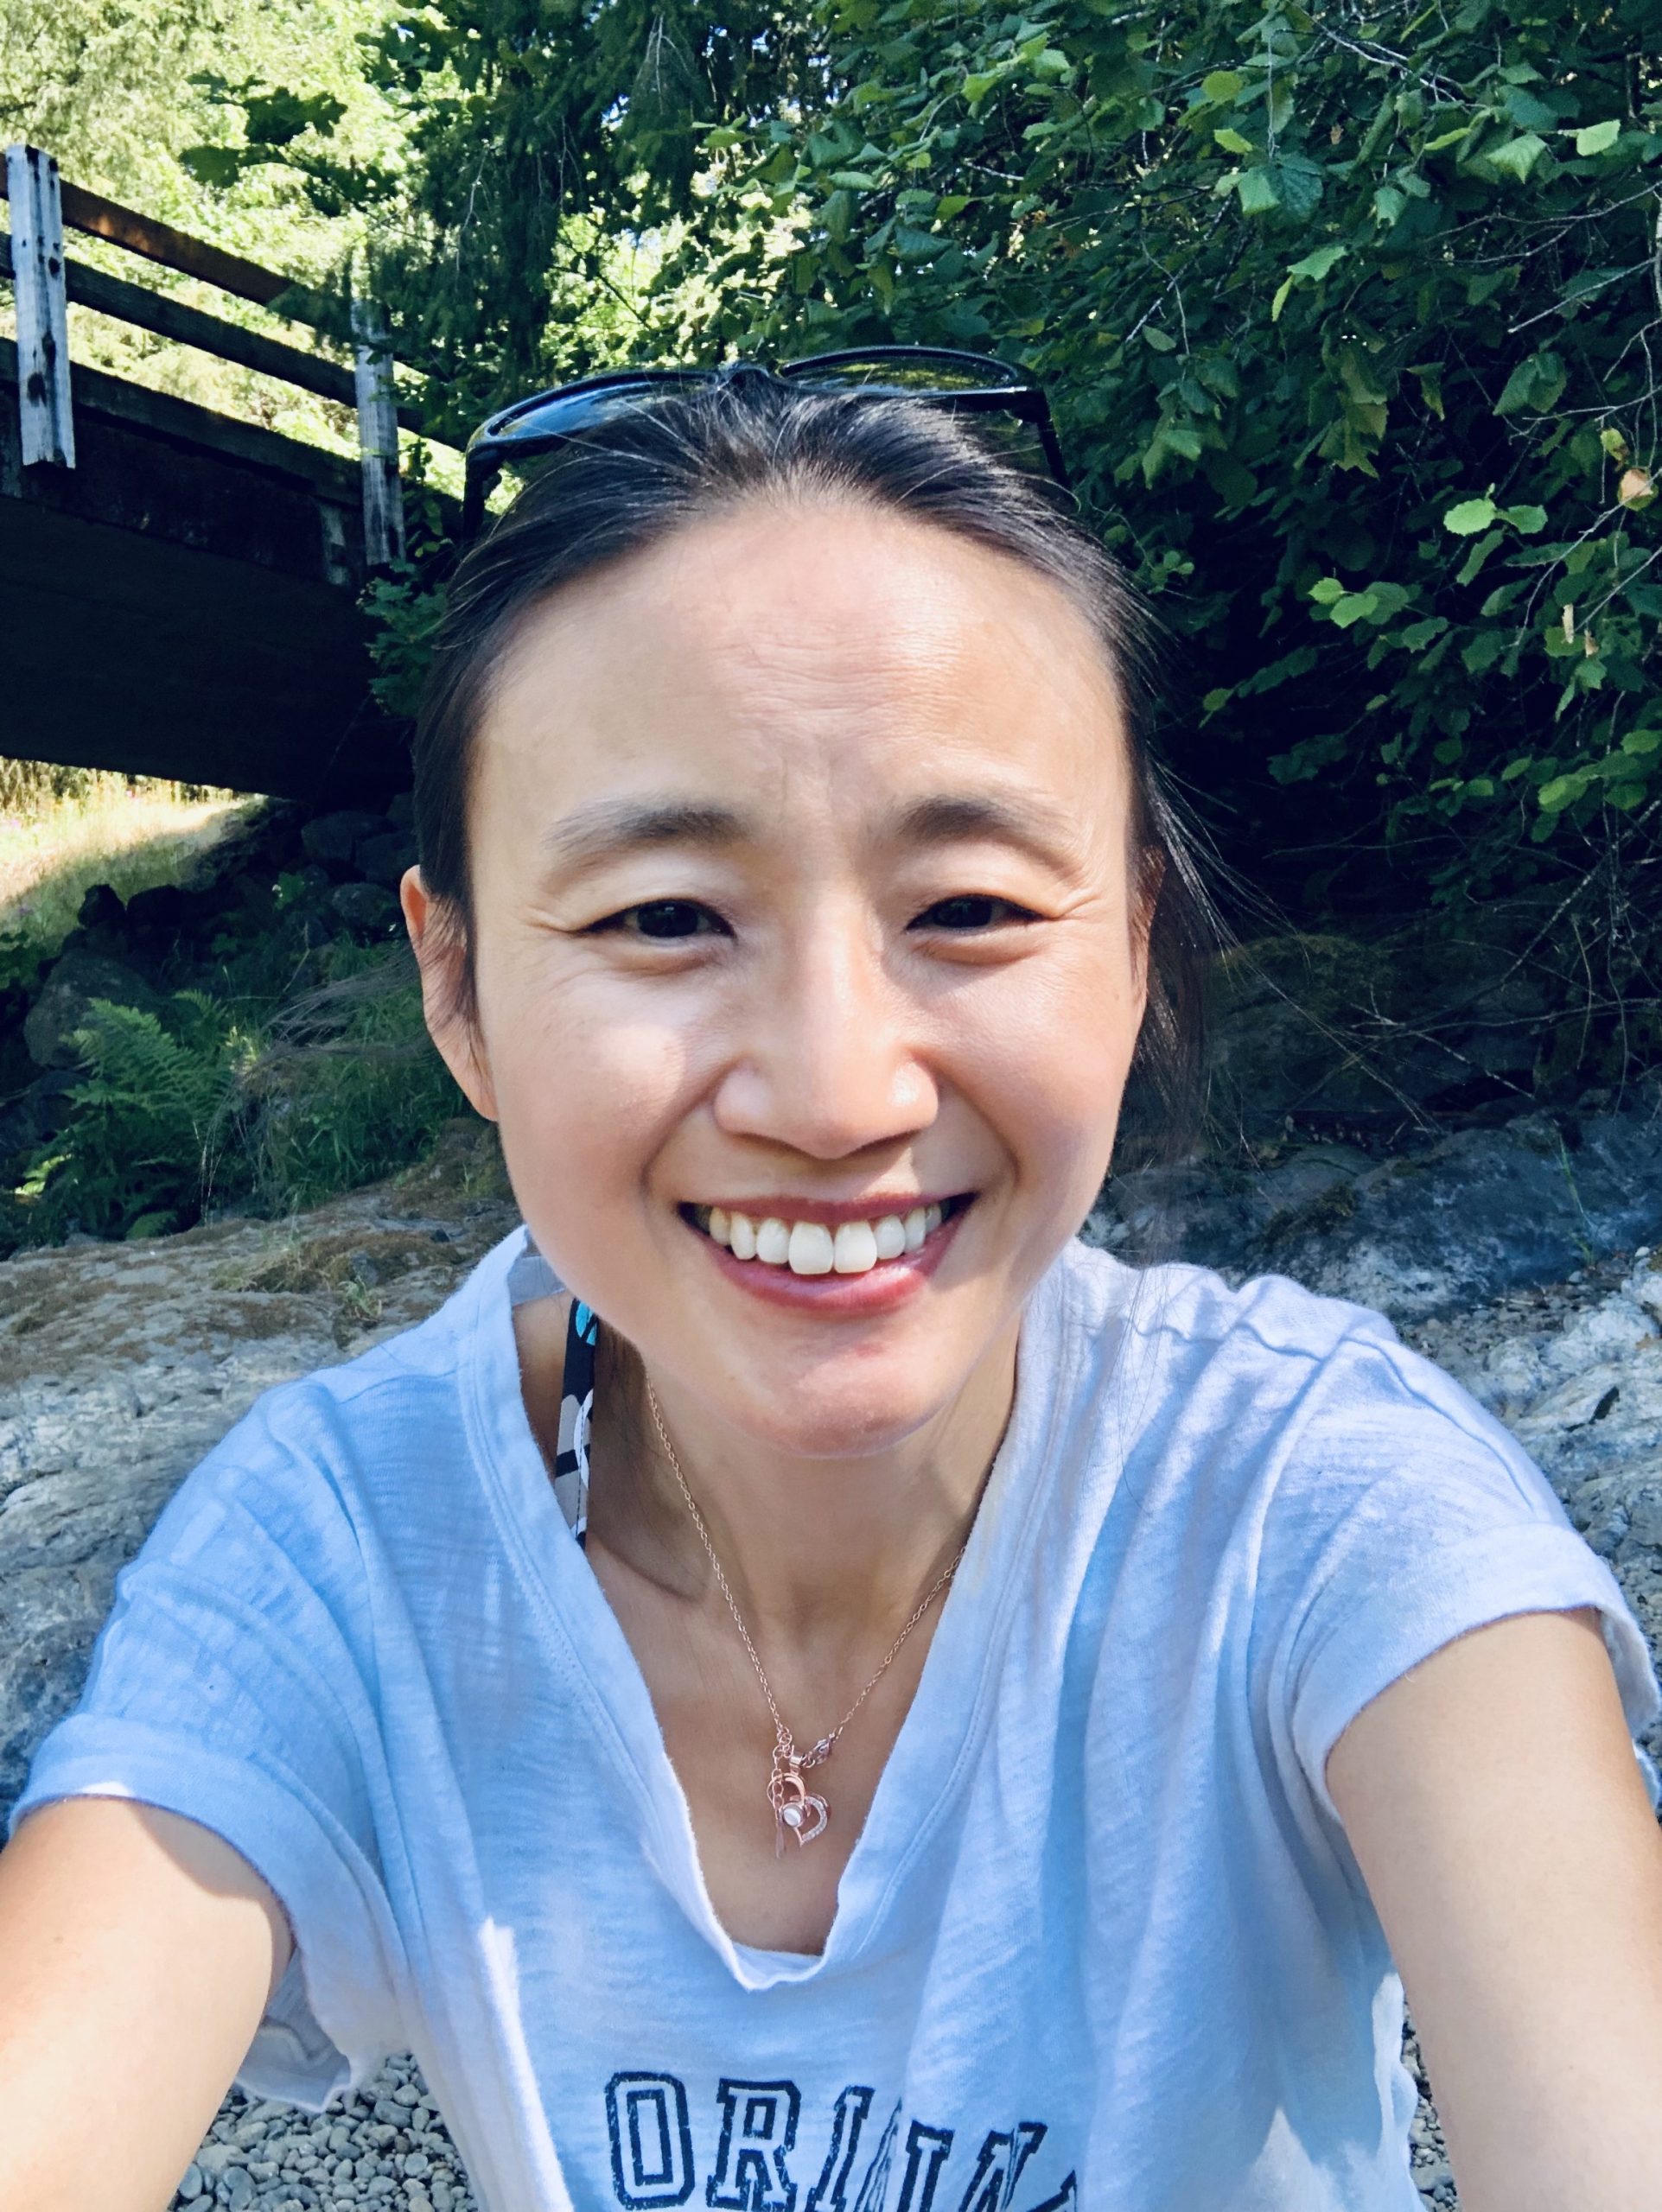 A headshot of smiling Yin Chang who has black hair in a ponytail. She is wearing sunglasses on top of her head, a gold necklace with a pearl, and a grey T-shirt. She is sitting on a rock with green plants and a bridge in the background.